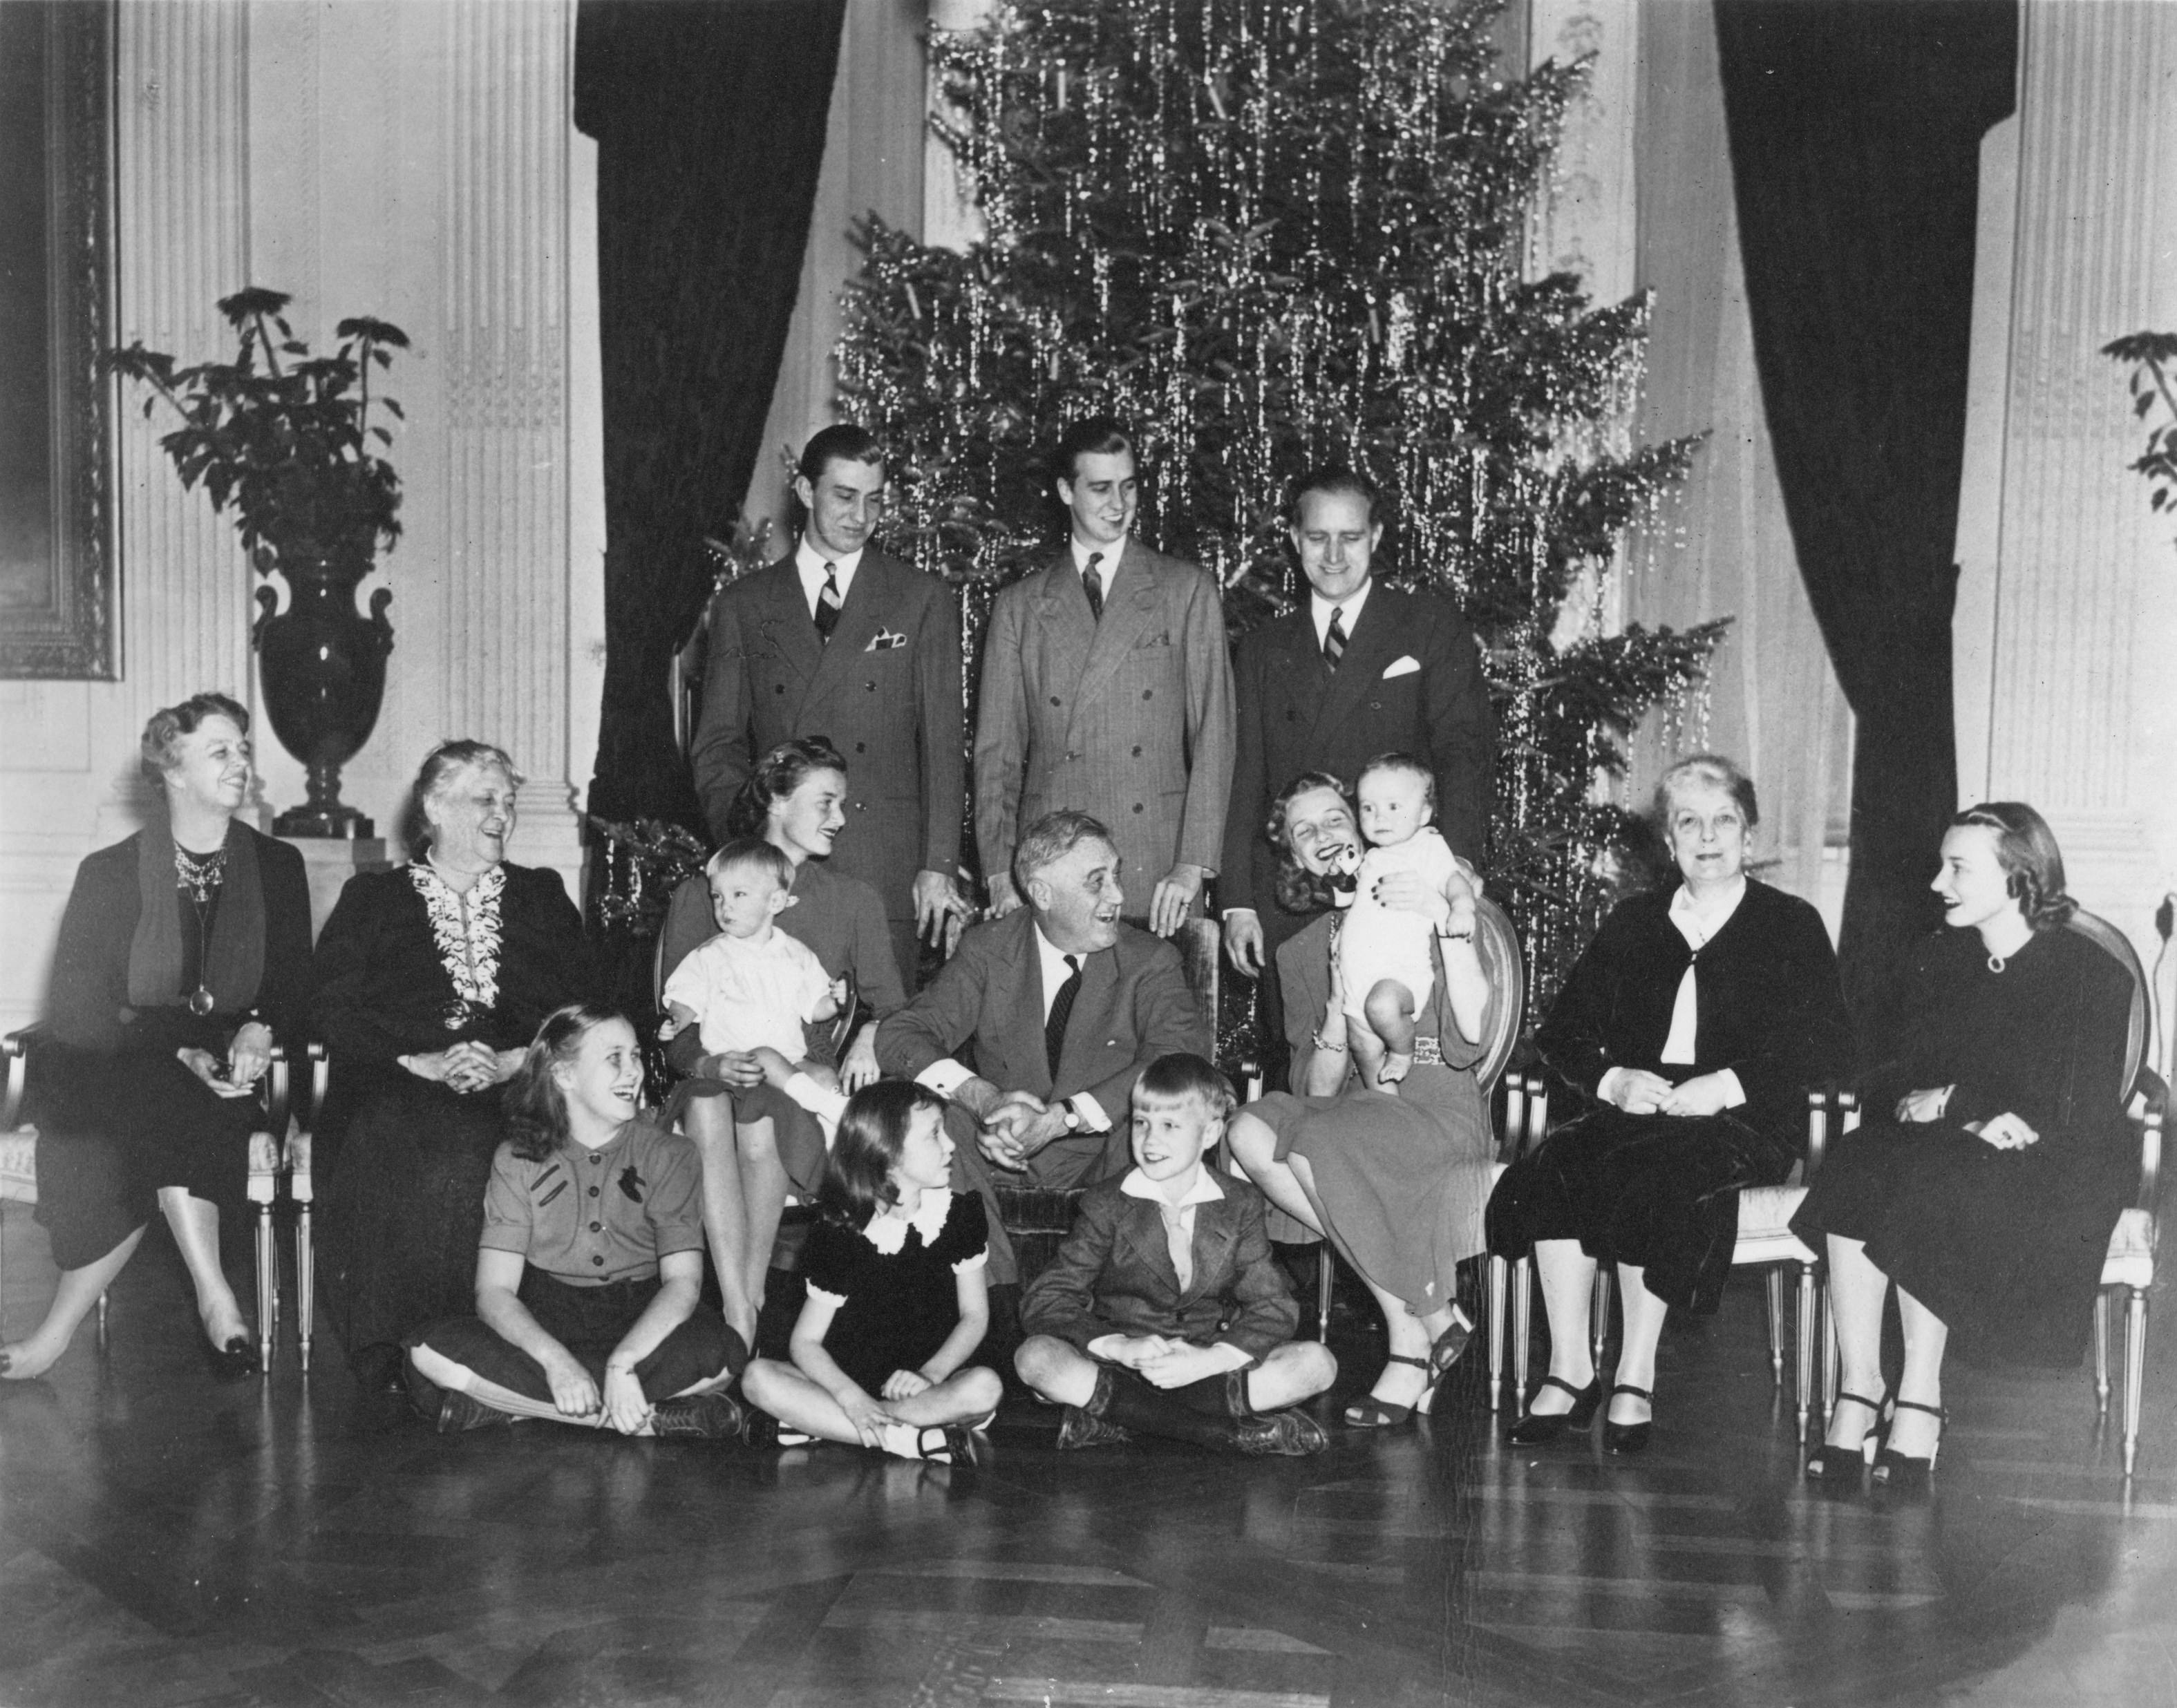 US President Franklin D Roosevelt celebrating Christmas with his family at the White House in Washington D.C. in the US in 1941.